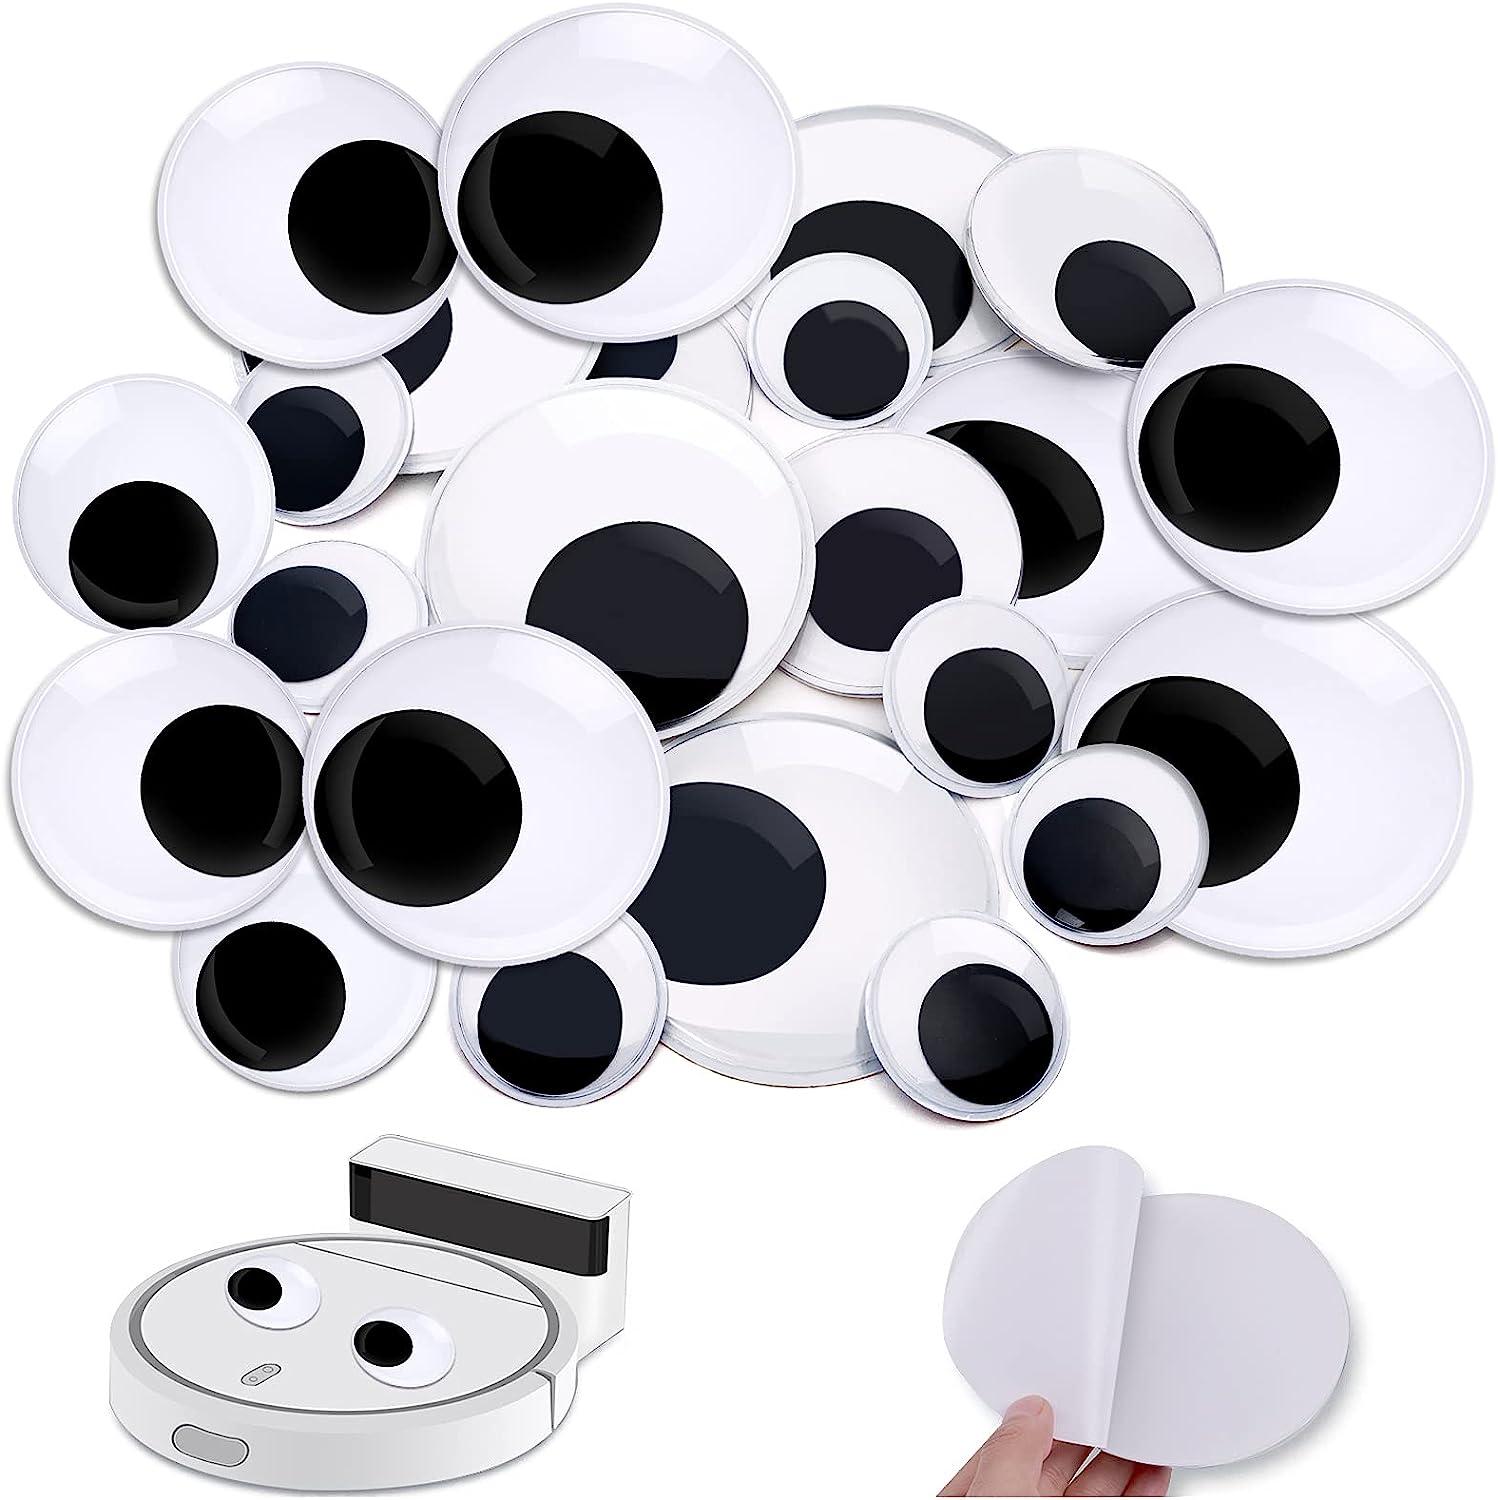 Bastex 3 inch Giant Googly Wiggle Eyes - 4 Pack. Includes Self Adhesive on  Backs. Big Wiggly Eyes for Decorations, Arts & Crafts